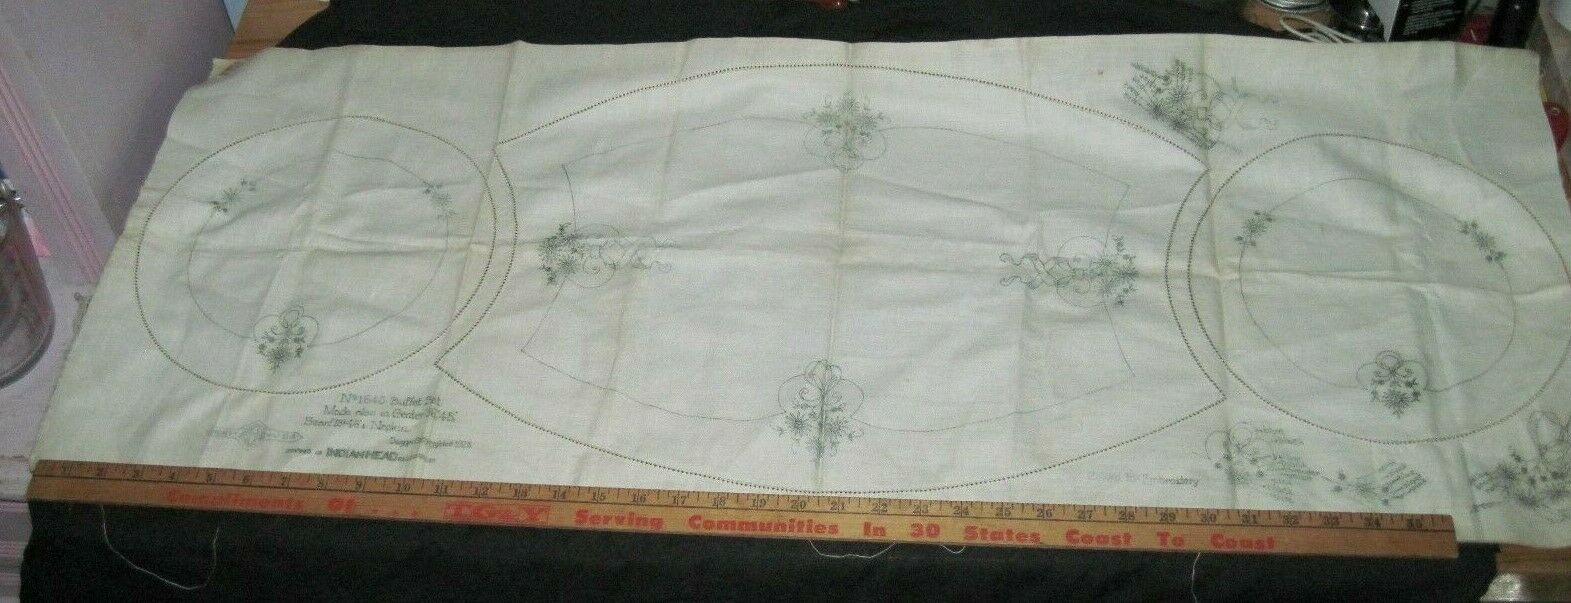 1925 Antique Embroidery Pattern ABC Chicago No 1640 Buffet Set See Condition